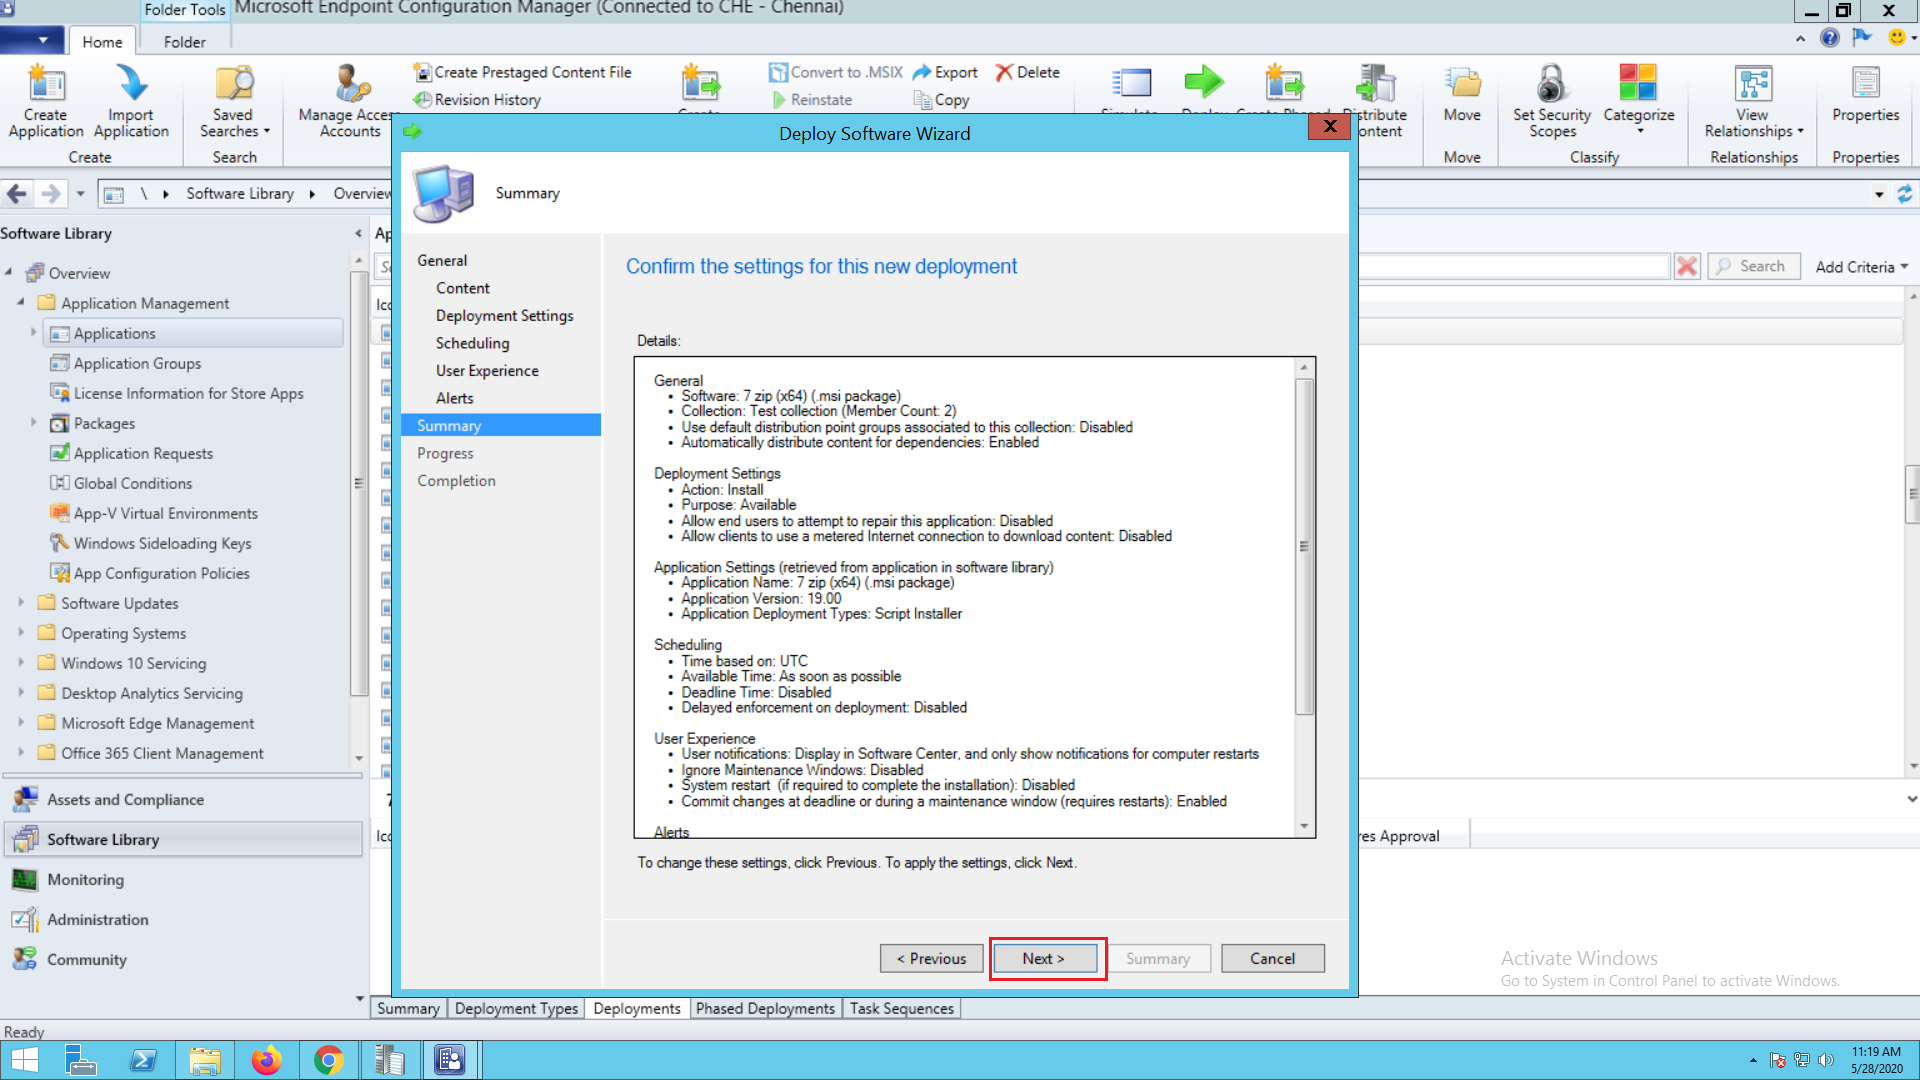 Step by step application deployment in SCCM - ManageEngine Patch Connect Plus